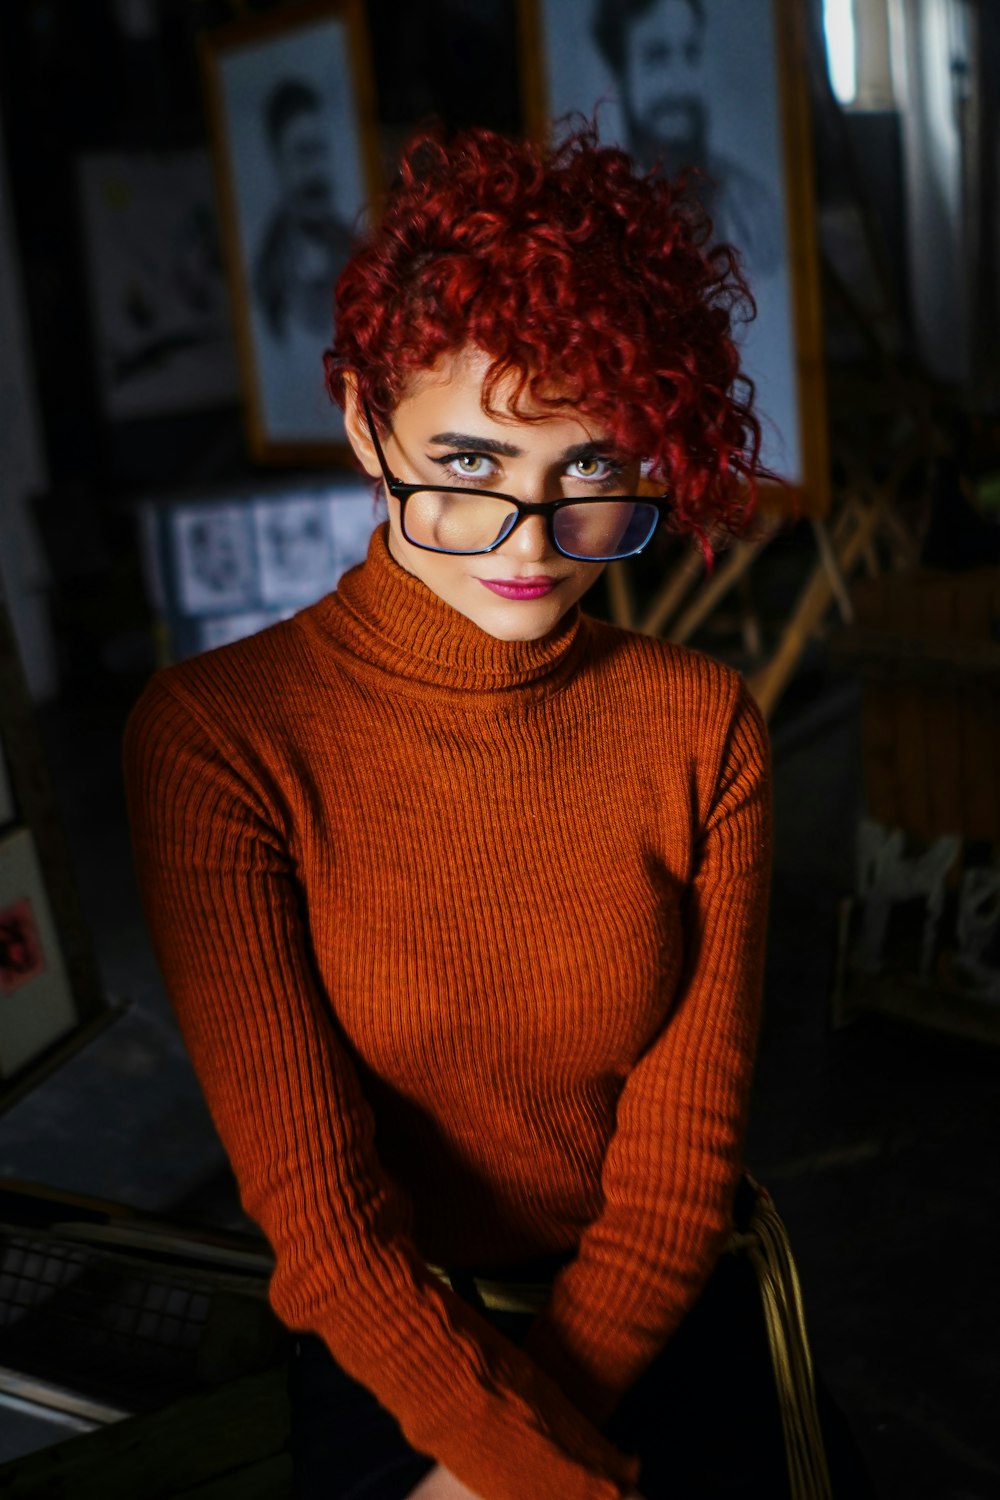 a woman with red hair and glasses sitting in a chair